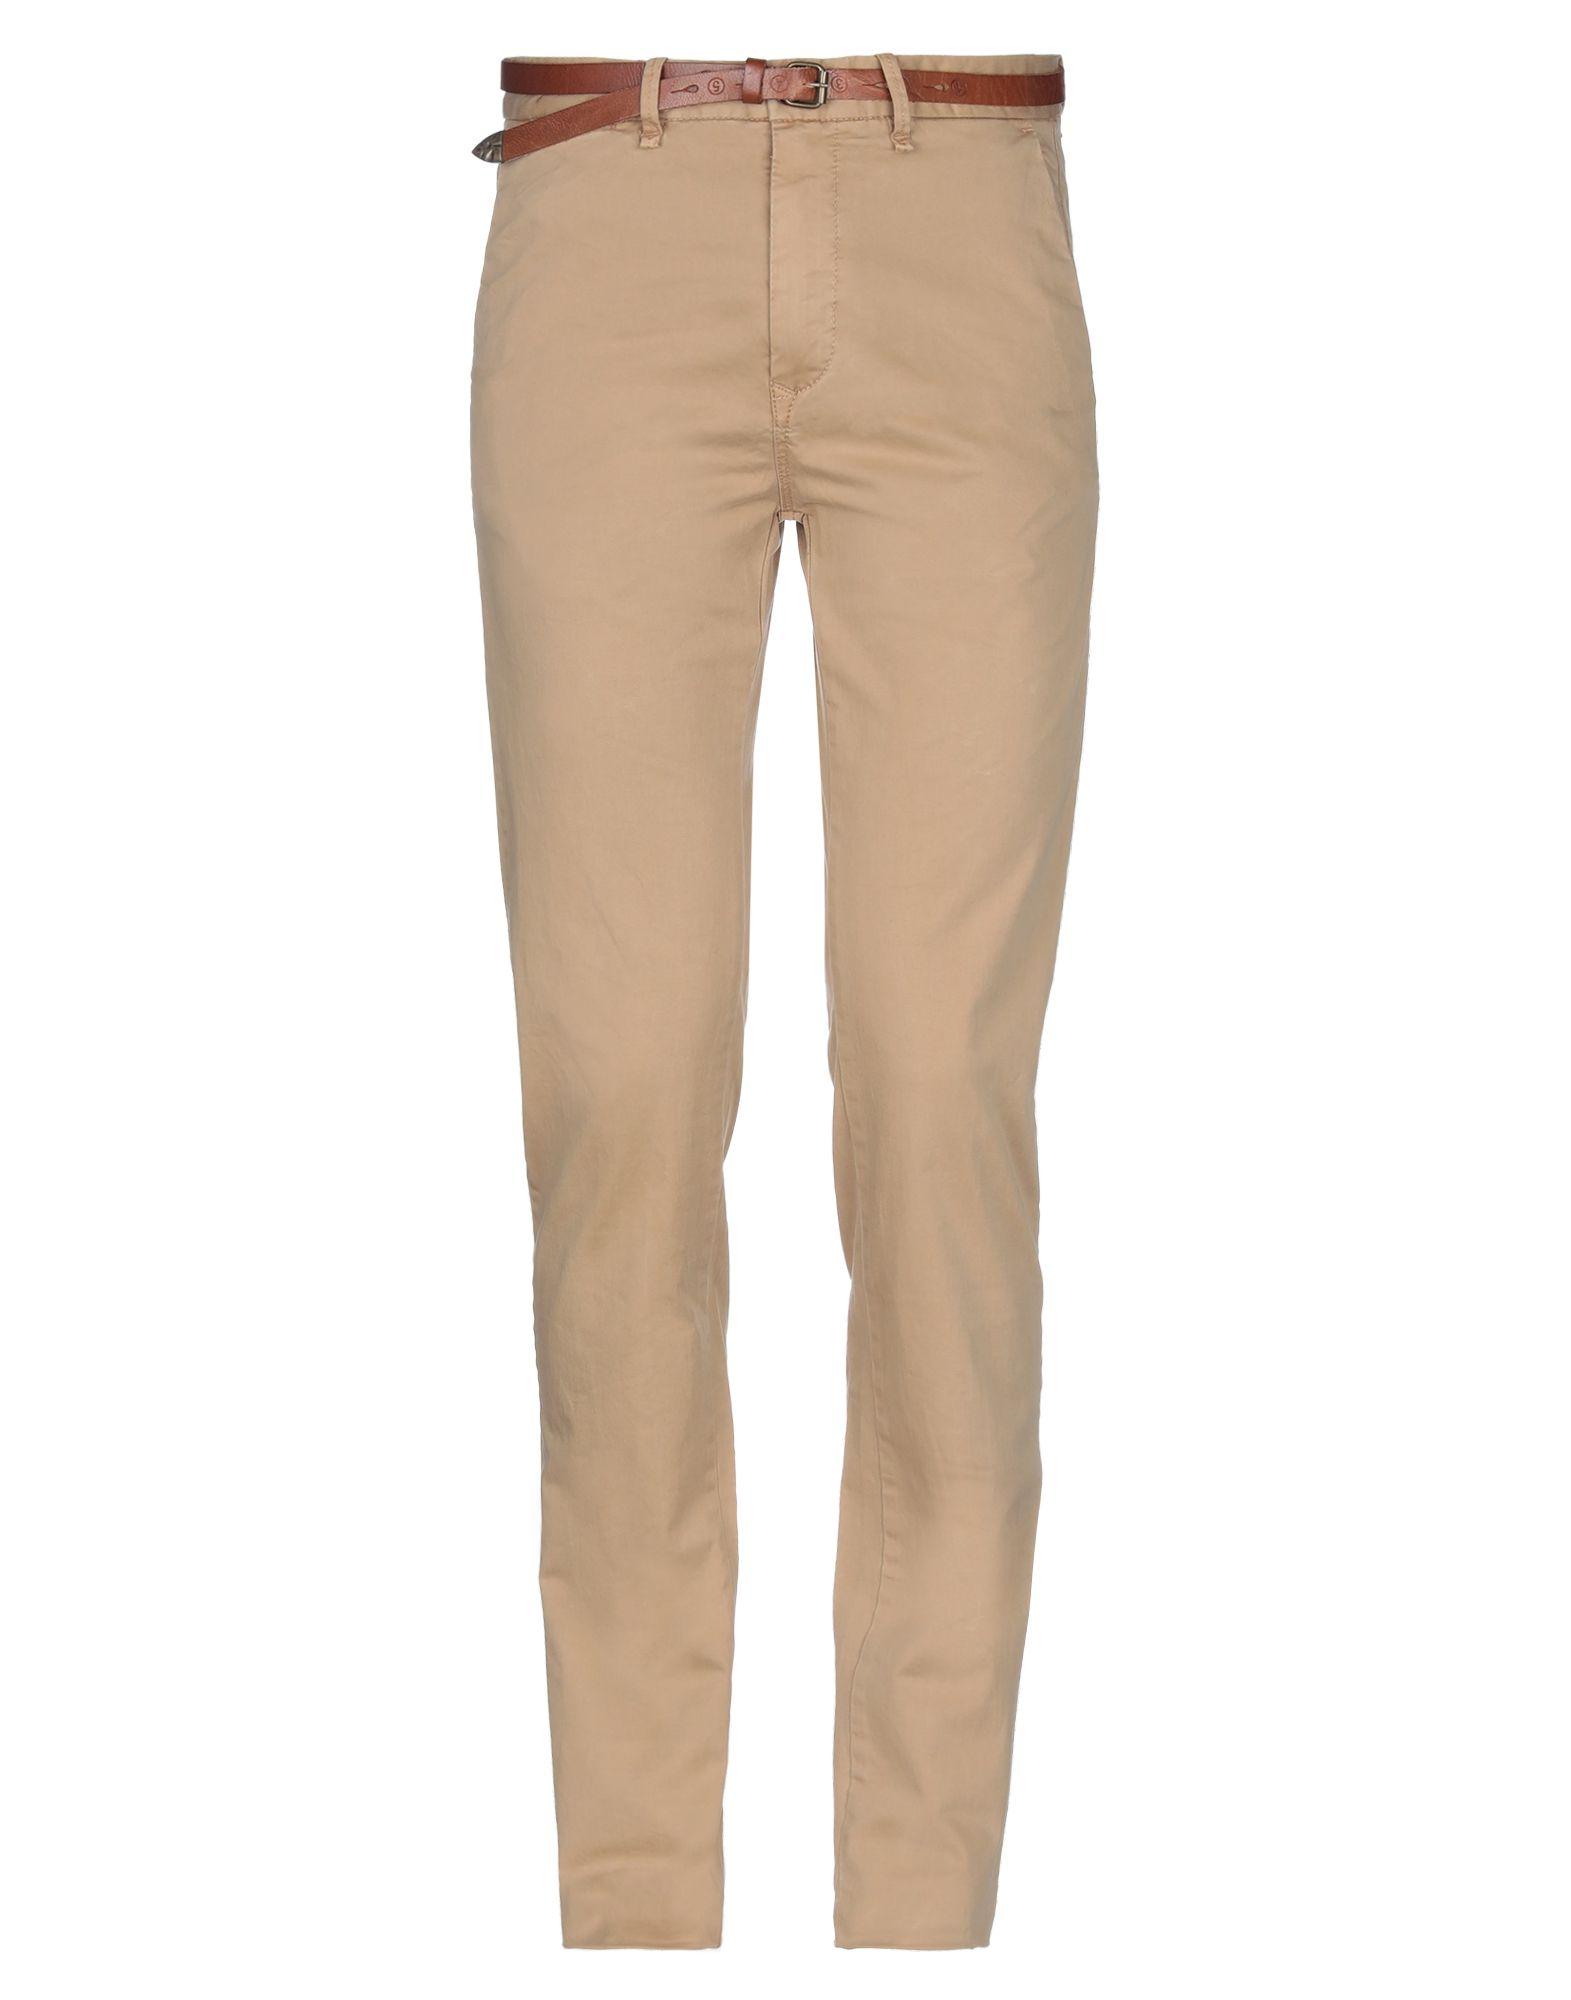 Scotch & Soda Casual Pants in Sand (Natural) for Men - Lyst